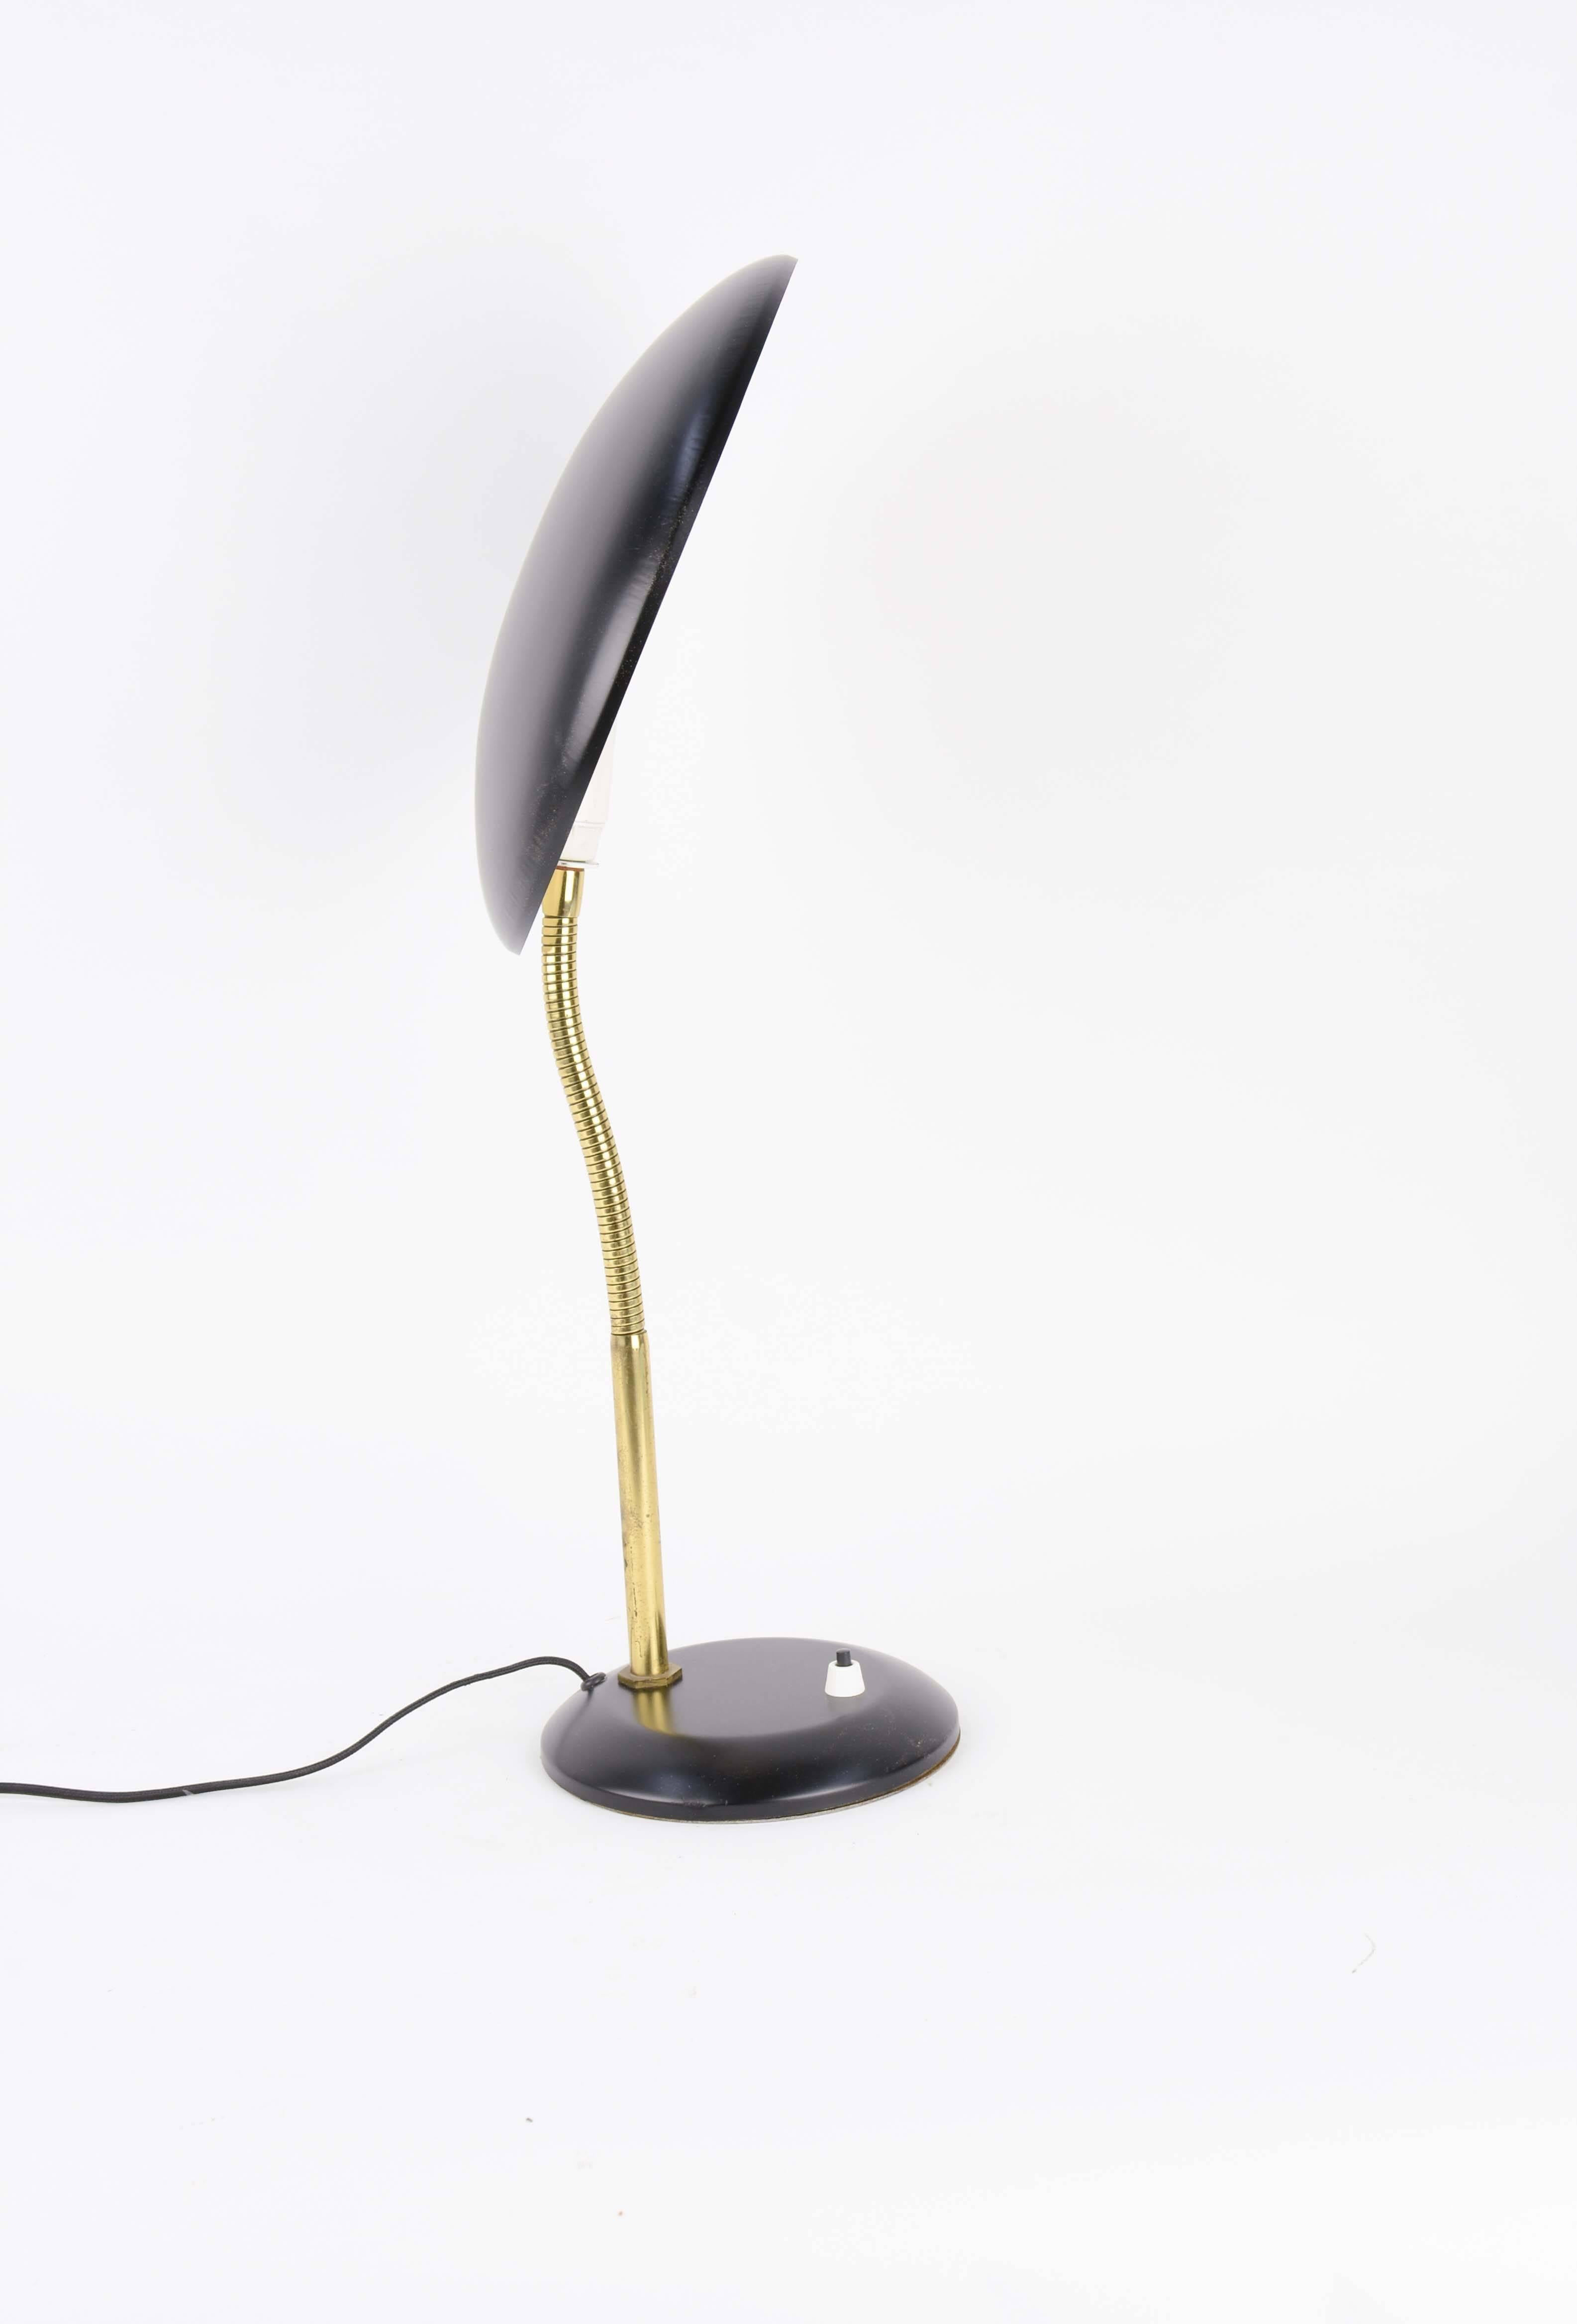 Imported from France is this gooseneck desk lamp with flying saucer light shade in black paint. Measure: 23